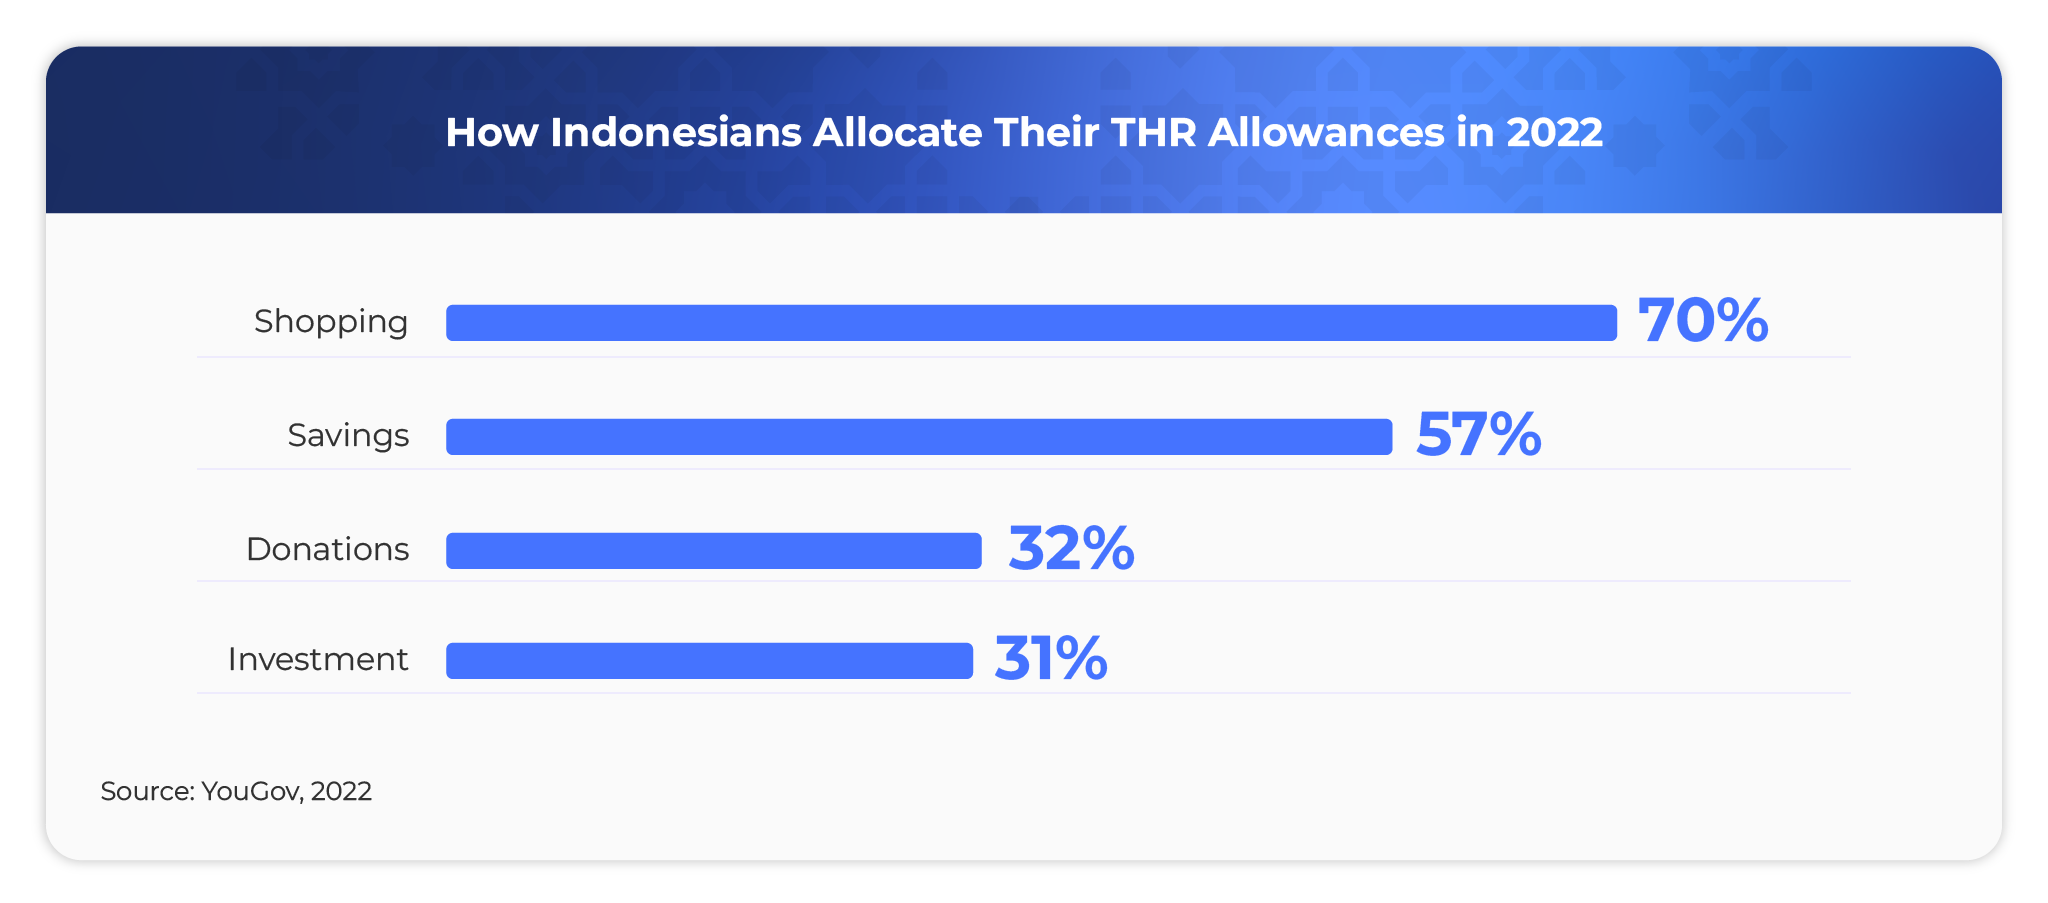 How Indonesians Allocate Their THR Allowances in 2022